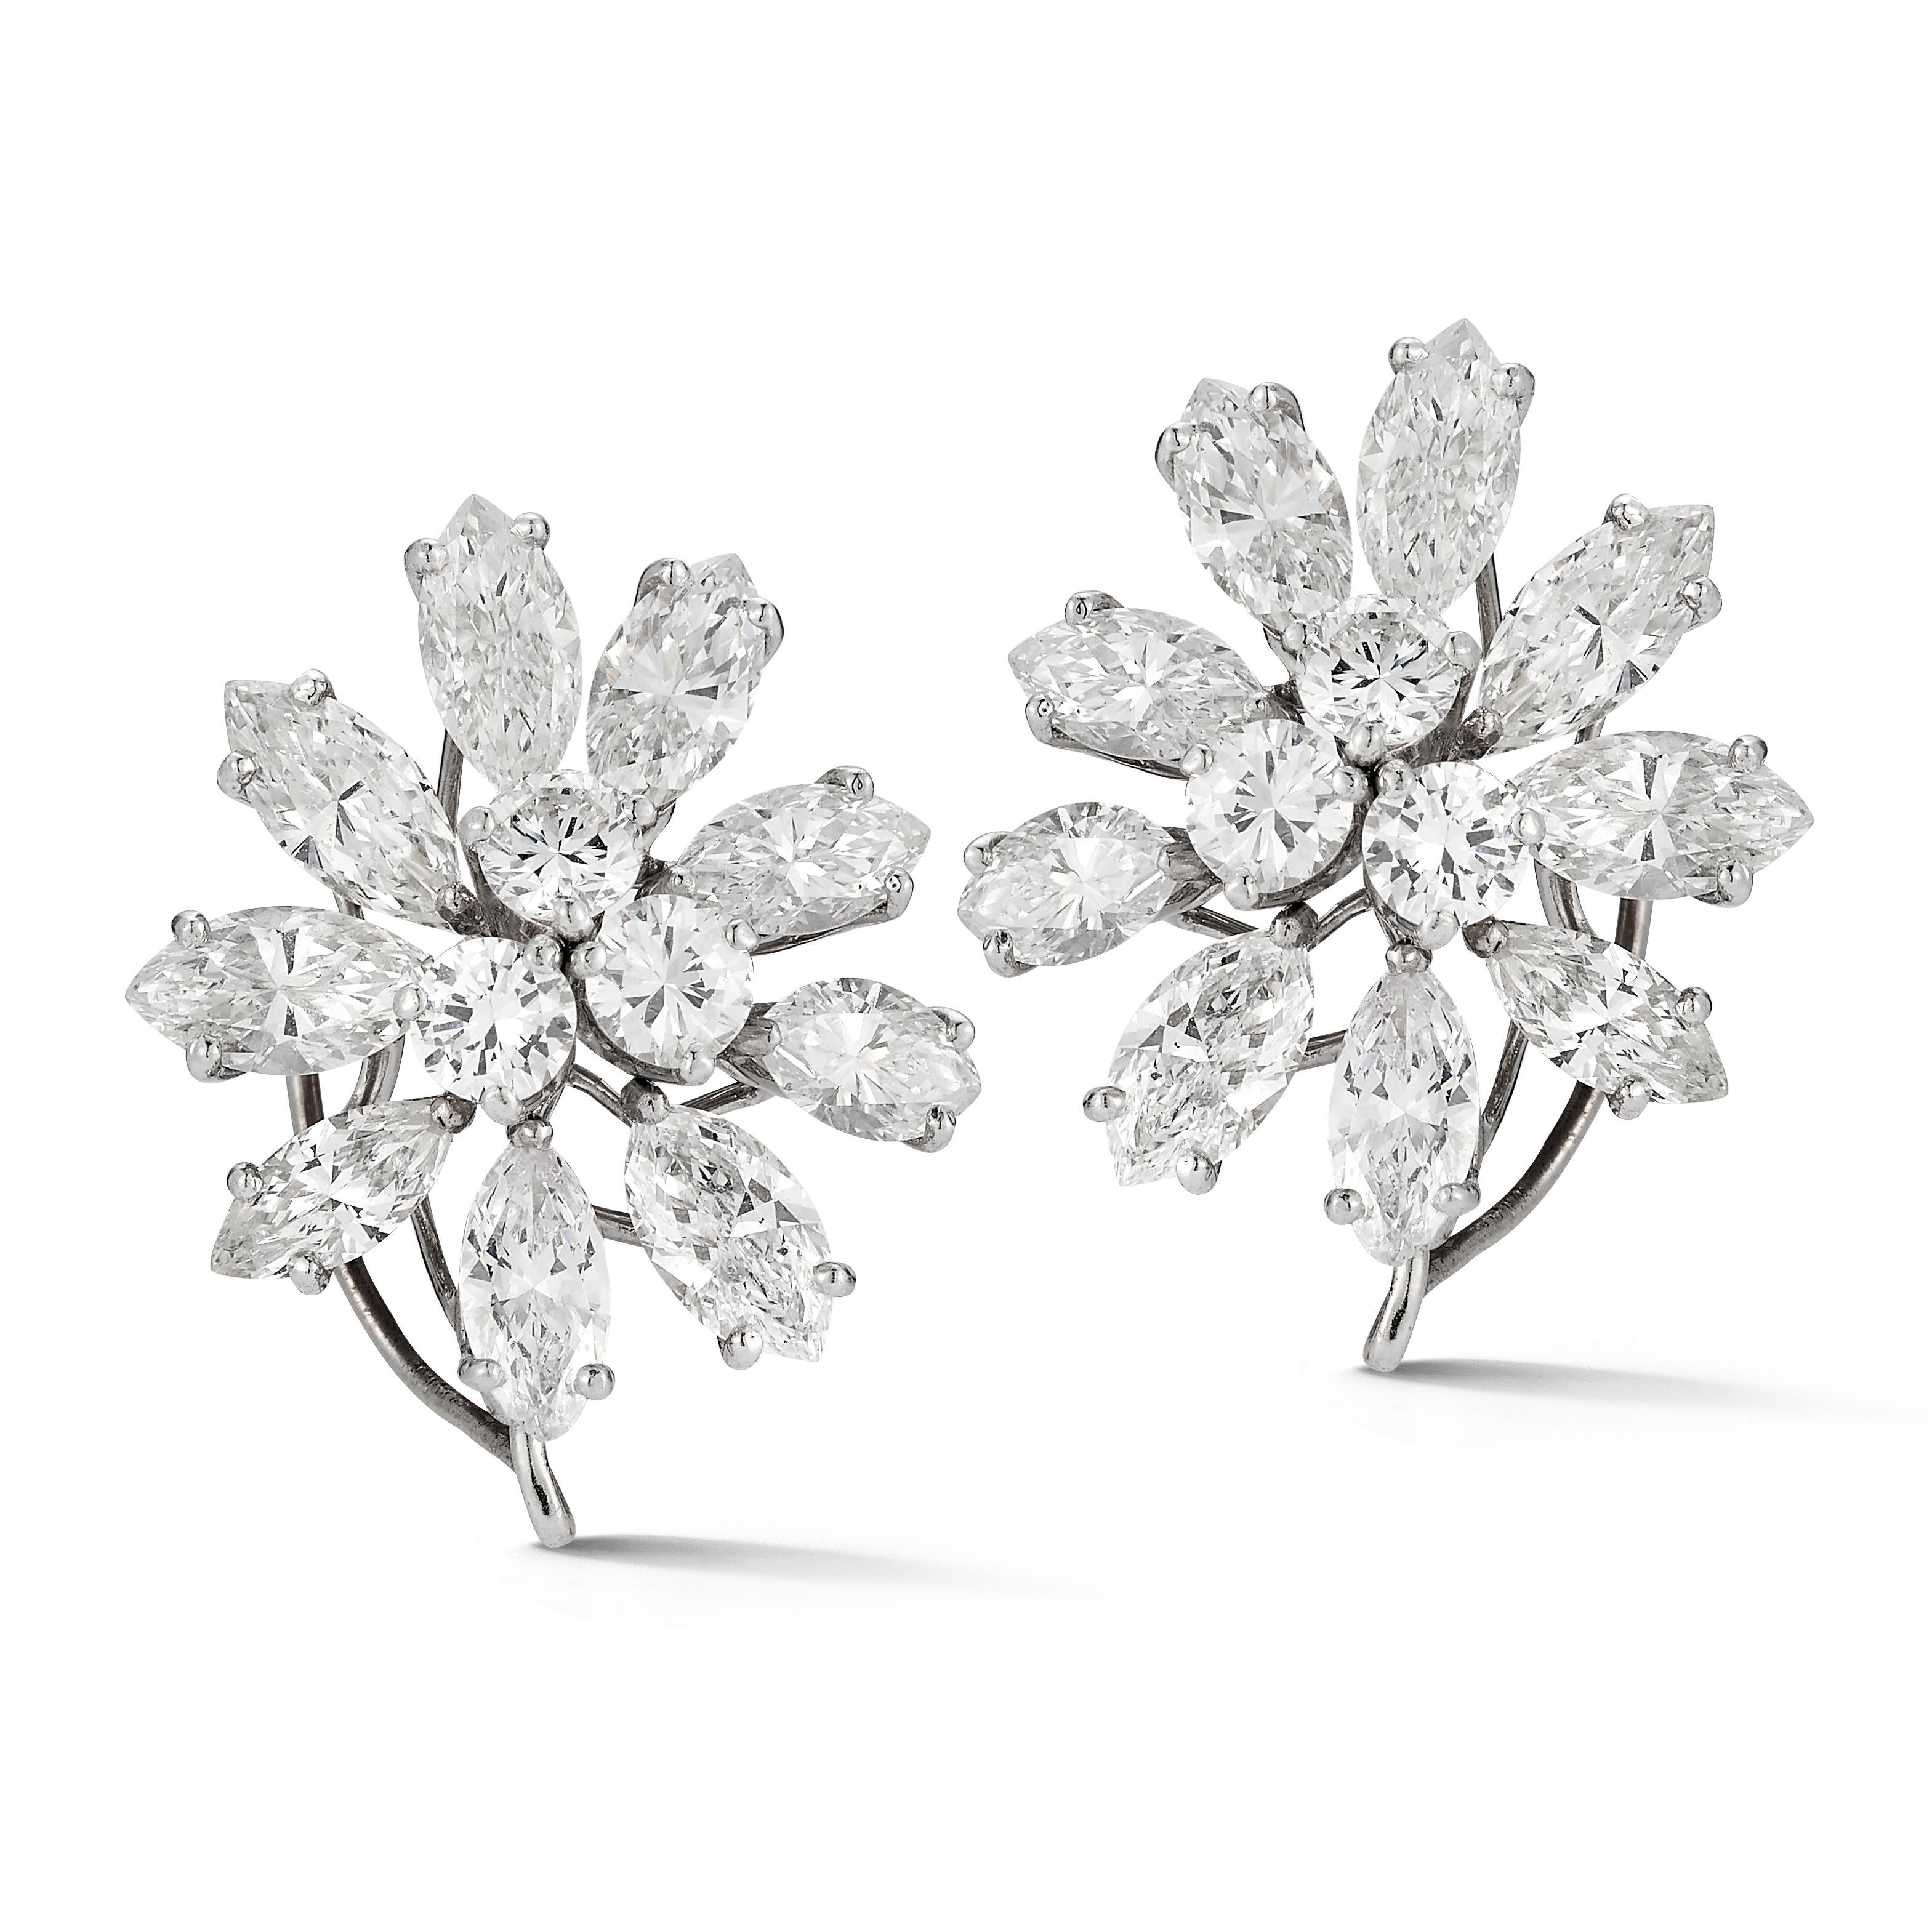 Cluster Diamond Earrings

A pair of platinum earrings set with 6 round cut diamonds and 18 marquise cut diamonds. 

Total Approximate Diamond Weight: 7.14 carats

Length: 0.75